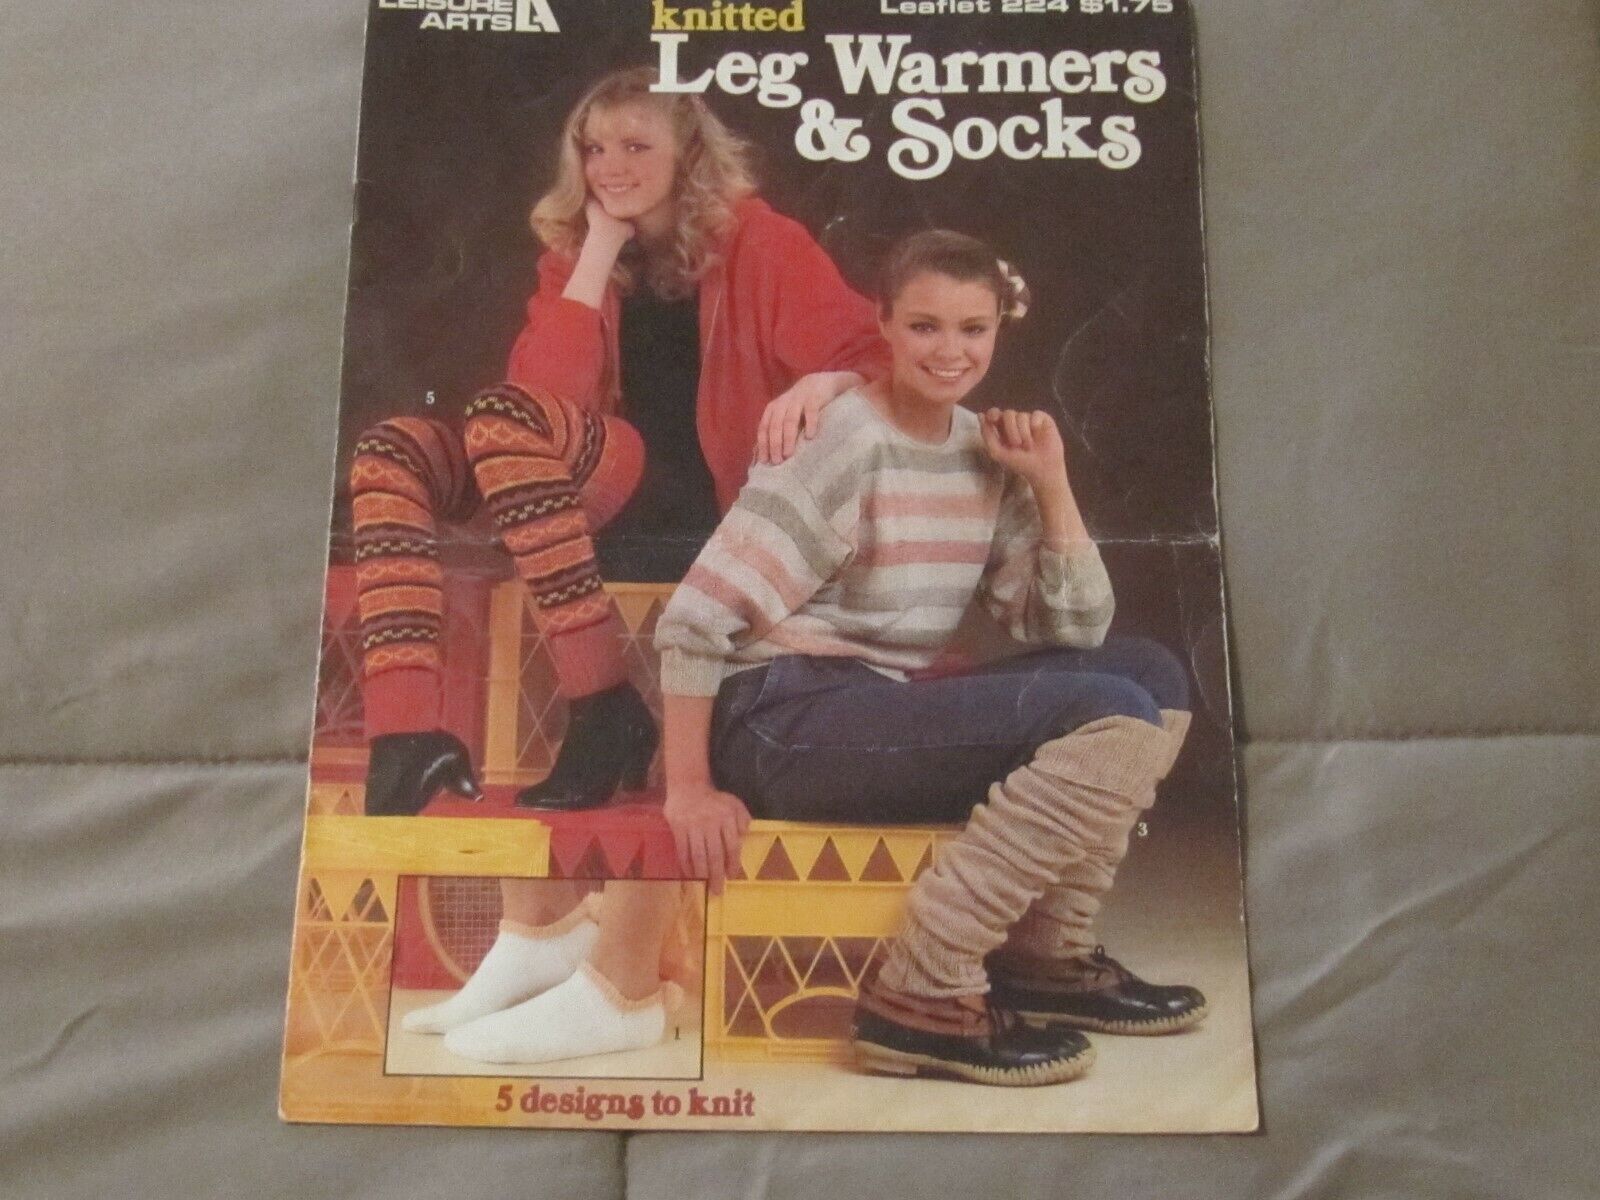 1982 LEISURE ARTS leaflet # 224 knitted leg warmers and socks